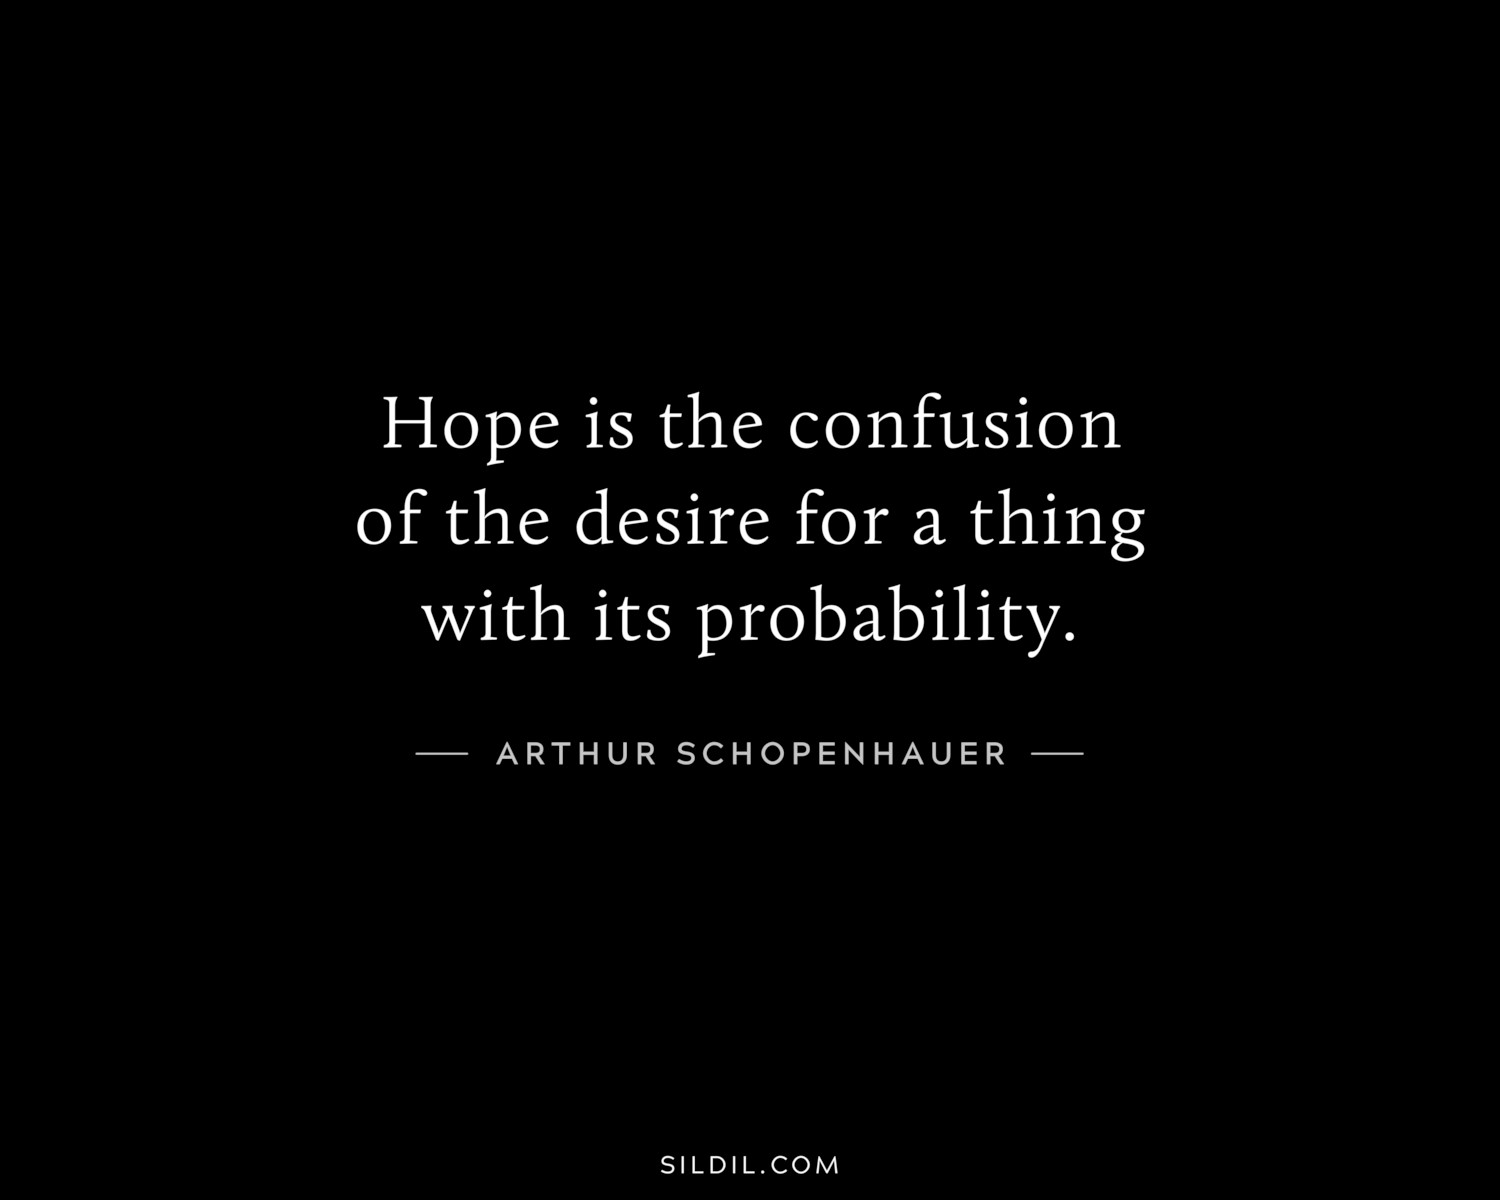 Hope is the confusion of the desire for a thing with its probability.